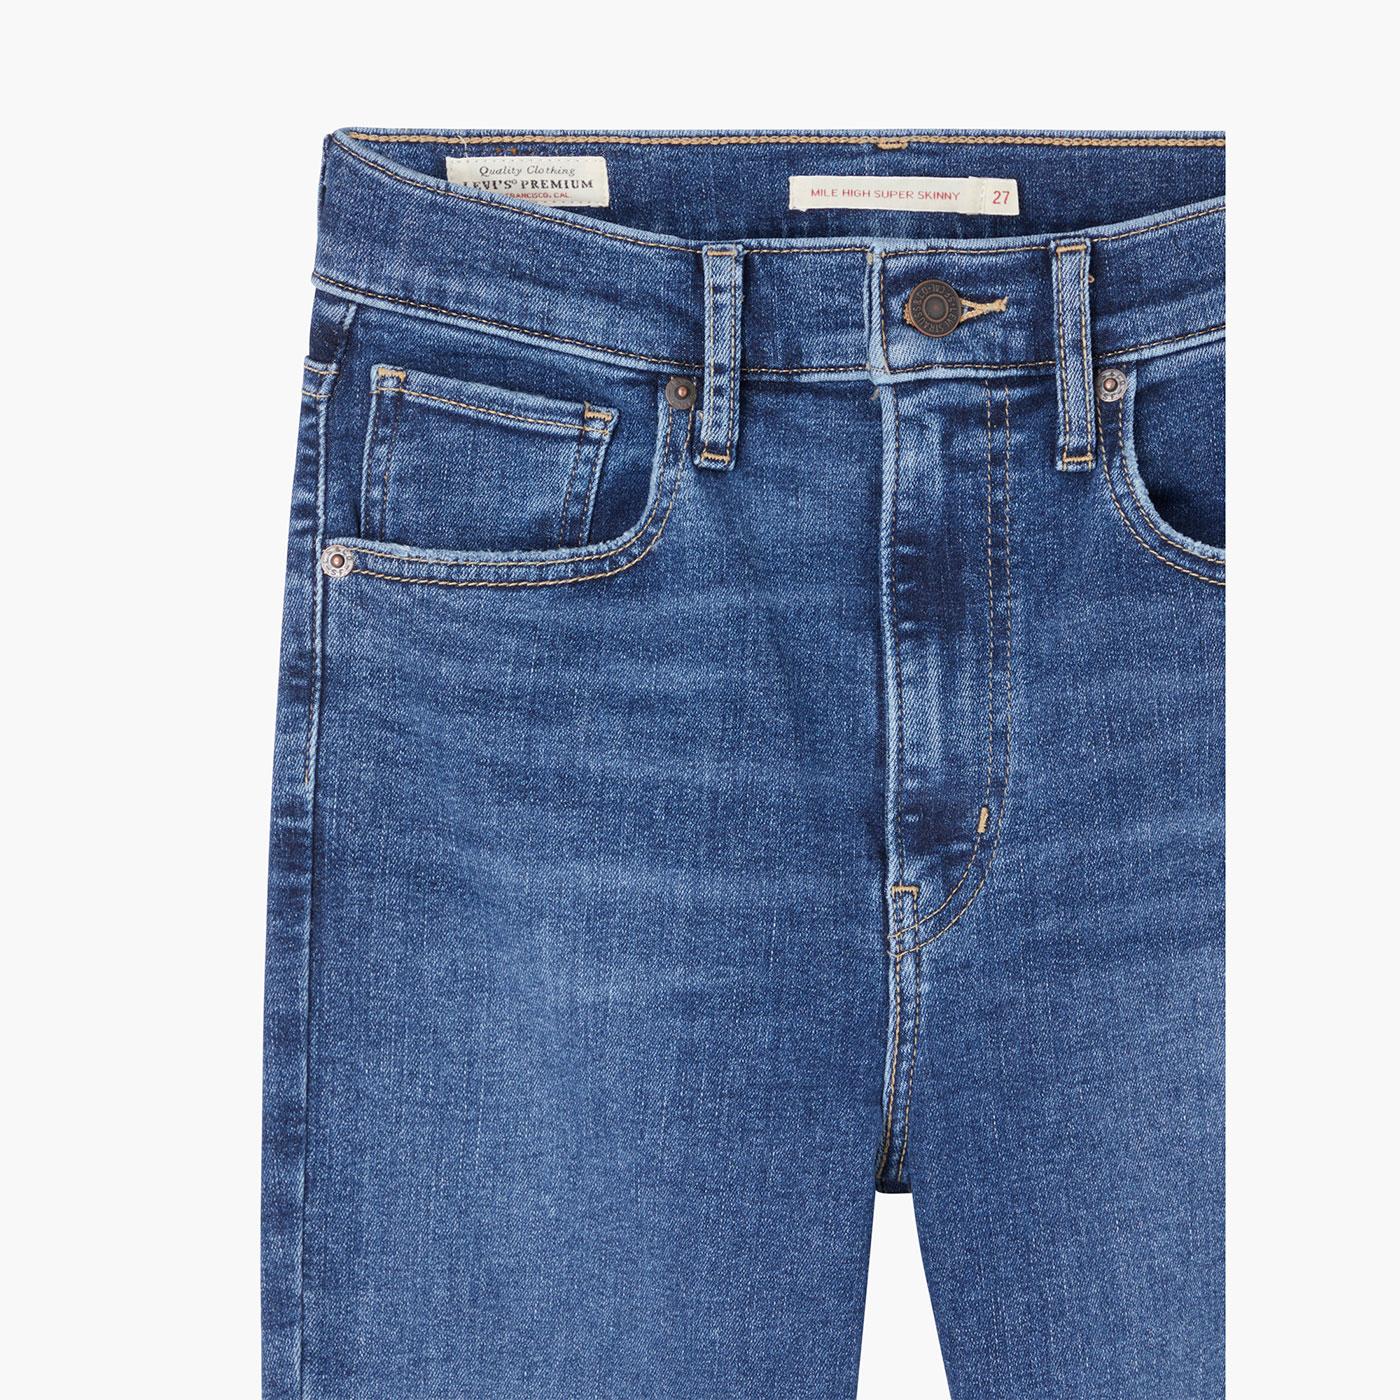 LEVI'S Mile High Super Skinny Jeans in Venice For Real